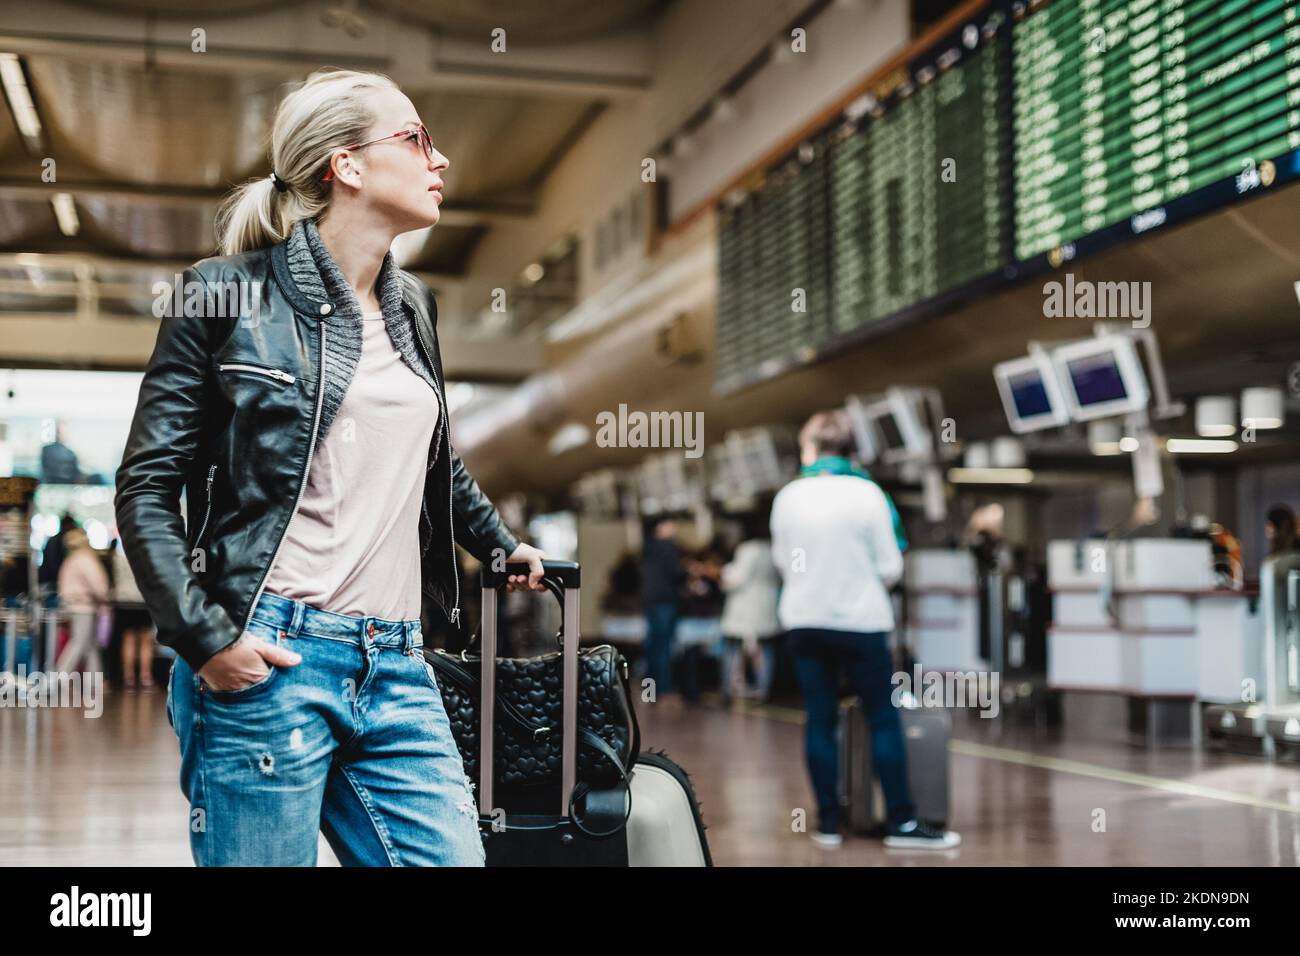 Casually dressed young stylish female traveller checking a departures board at the airport terminal hall in front of check in couters. Flight schedule display blured in the background. Focus on woman. Stock Photo